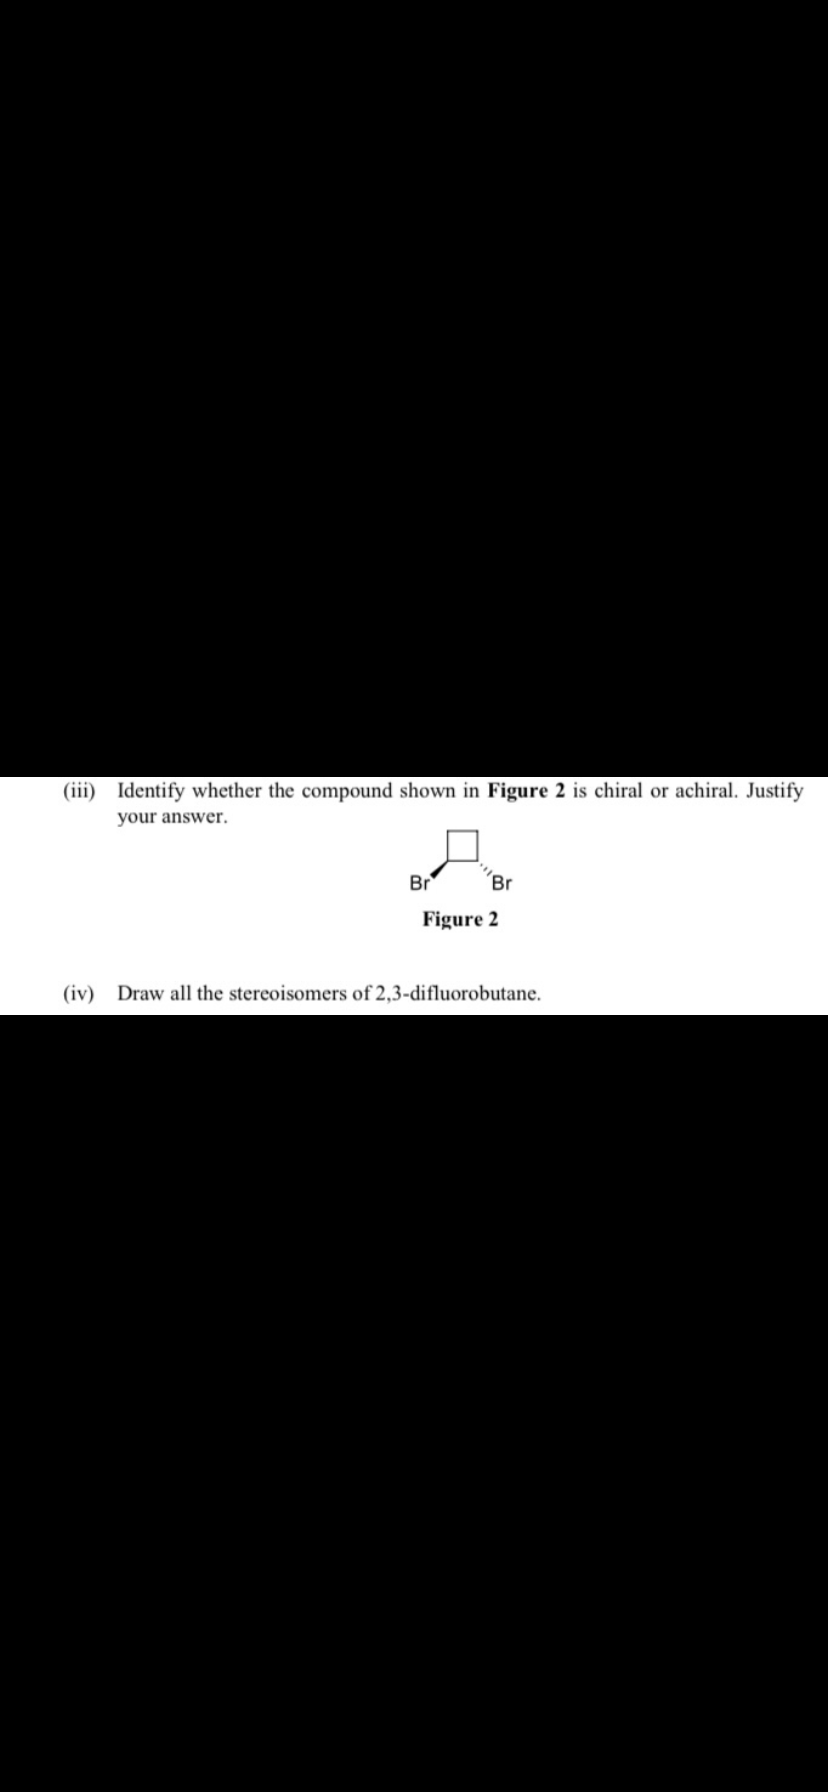 (iii) Identify whether the compound shown in Figure 2 is chiral or achiral. Justify
your answer.
Br
Br
Figure 2
(iv) Draw all the stereoisomers of 2,3-difluorobutane.